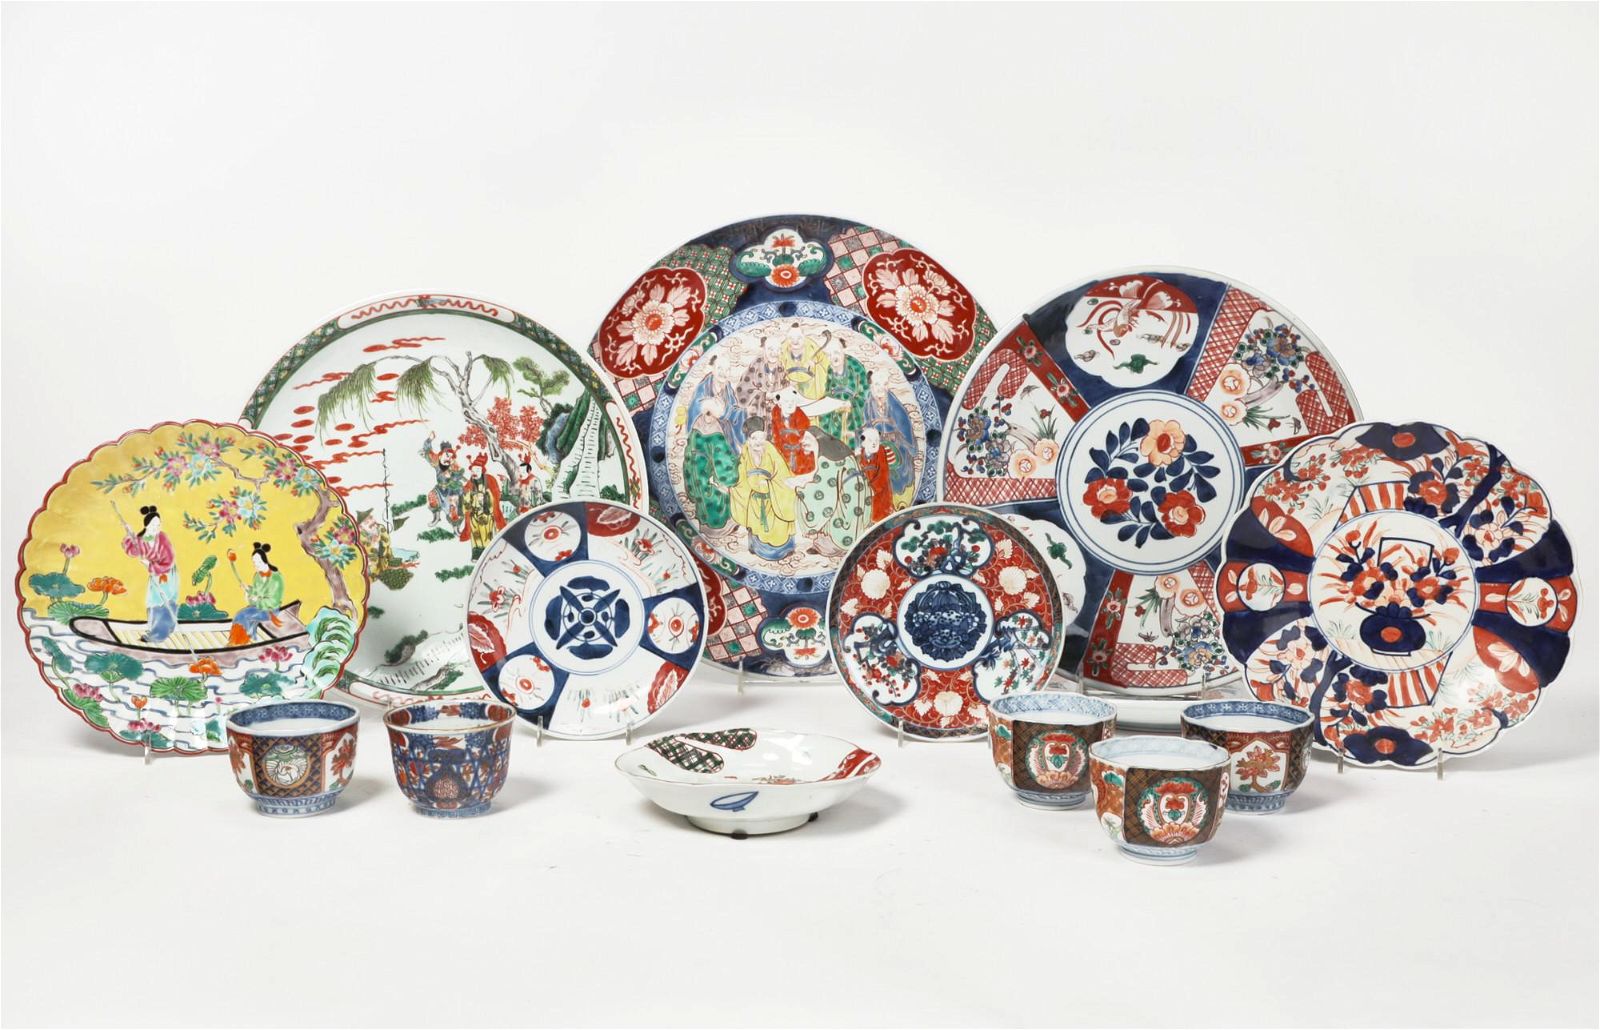 14 PIECES OF JAPANESE PORCELAIN